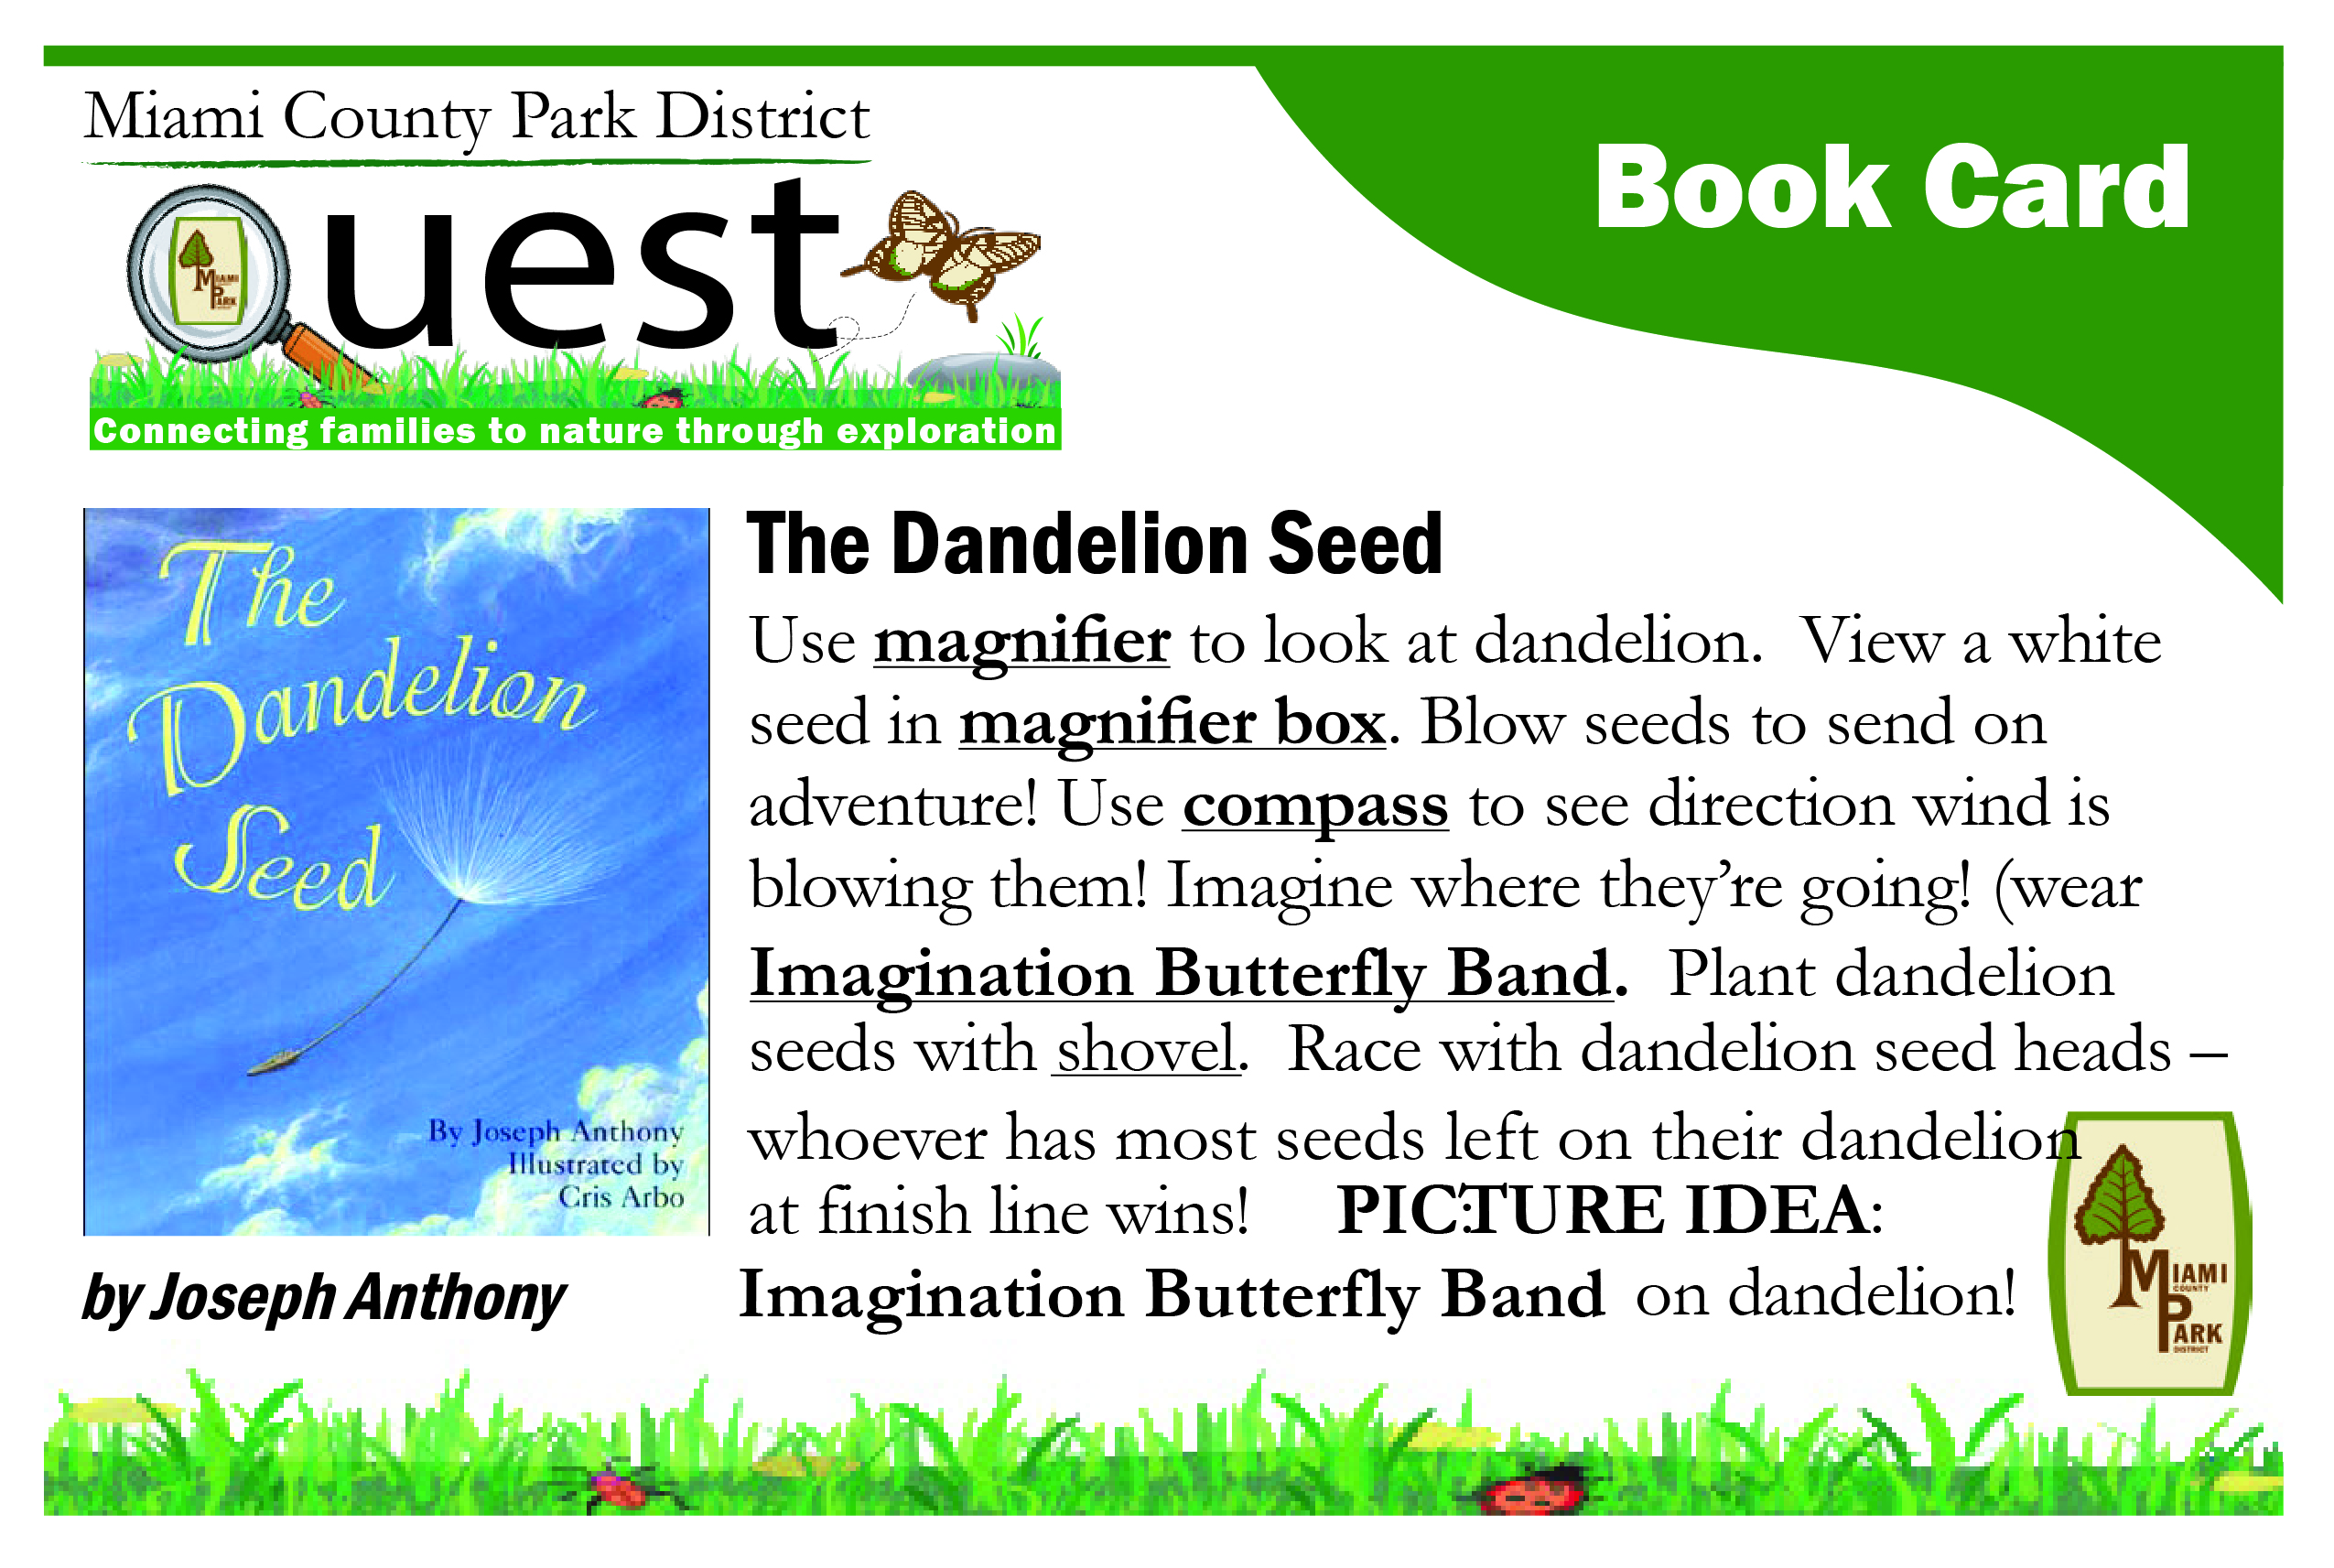 The Dandelion Seed Book Card